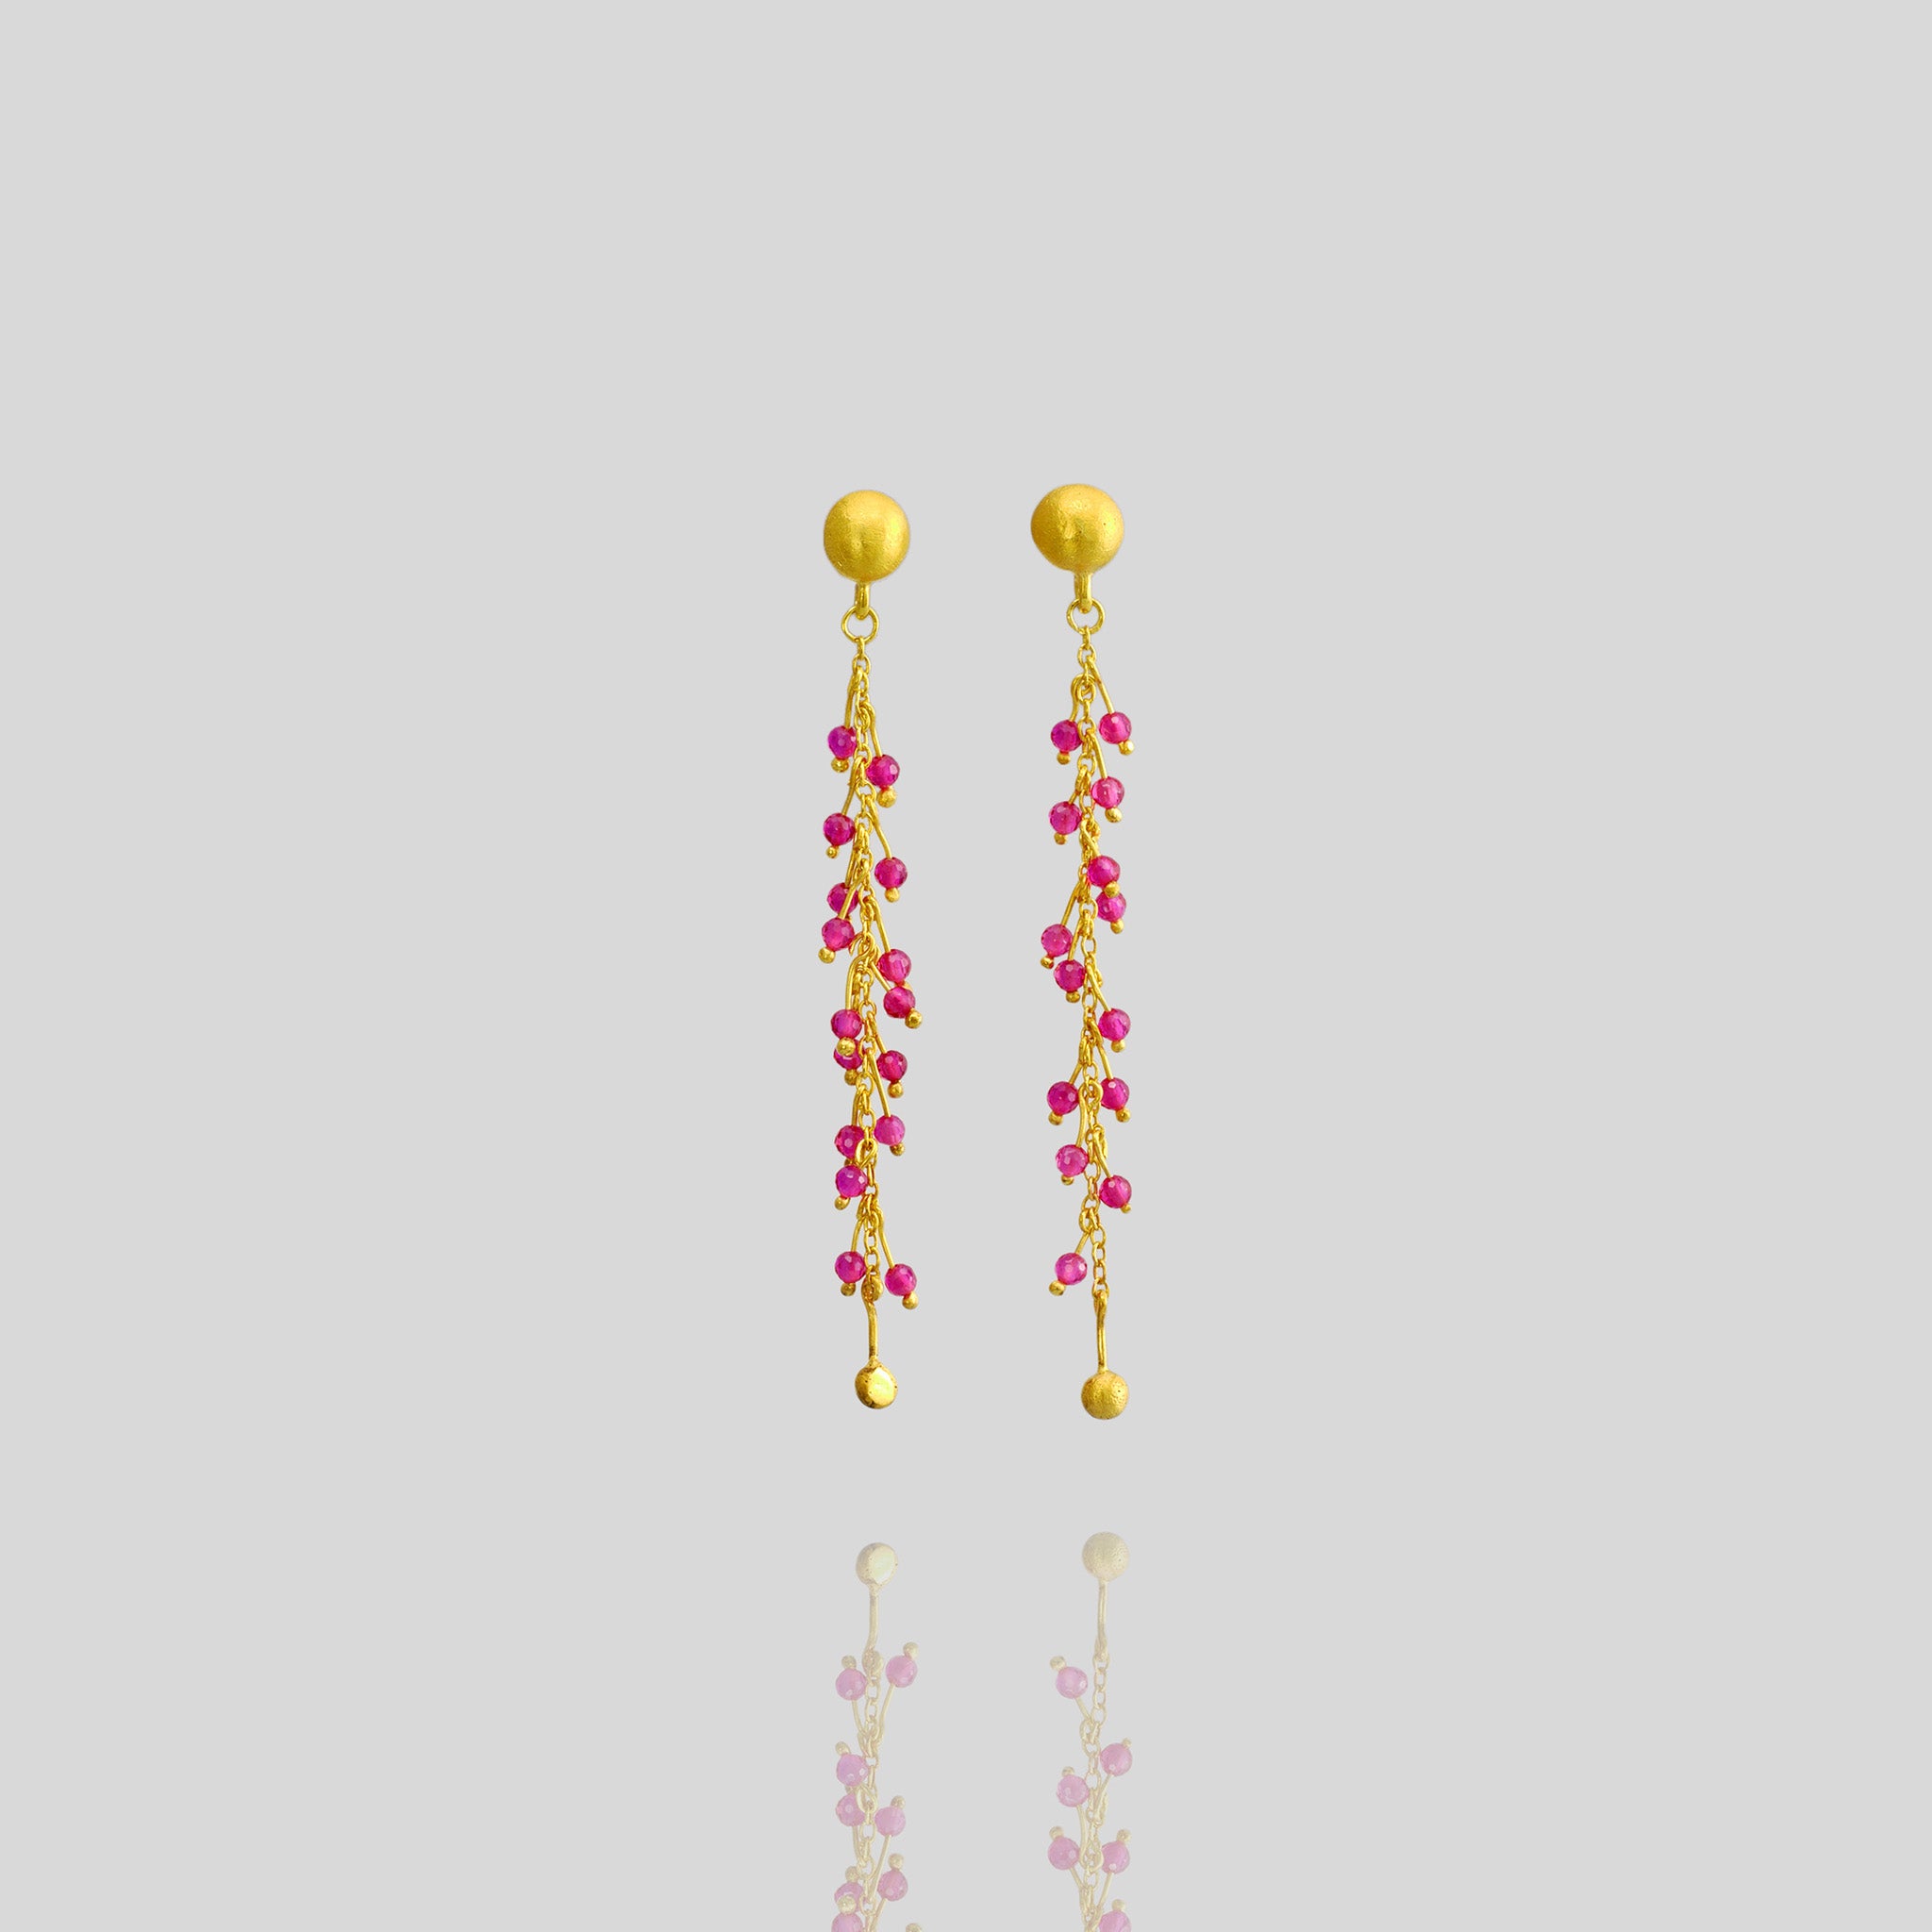 18k gold studs adorned with radiant ruby beads on shimmering gold threads, inspired by Venus emerging from the sea.